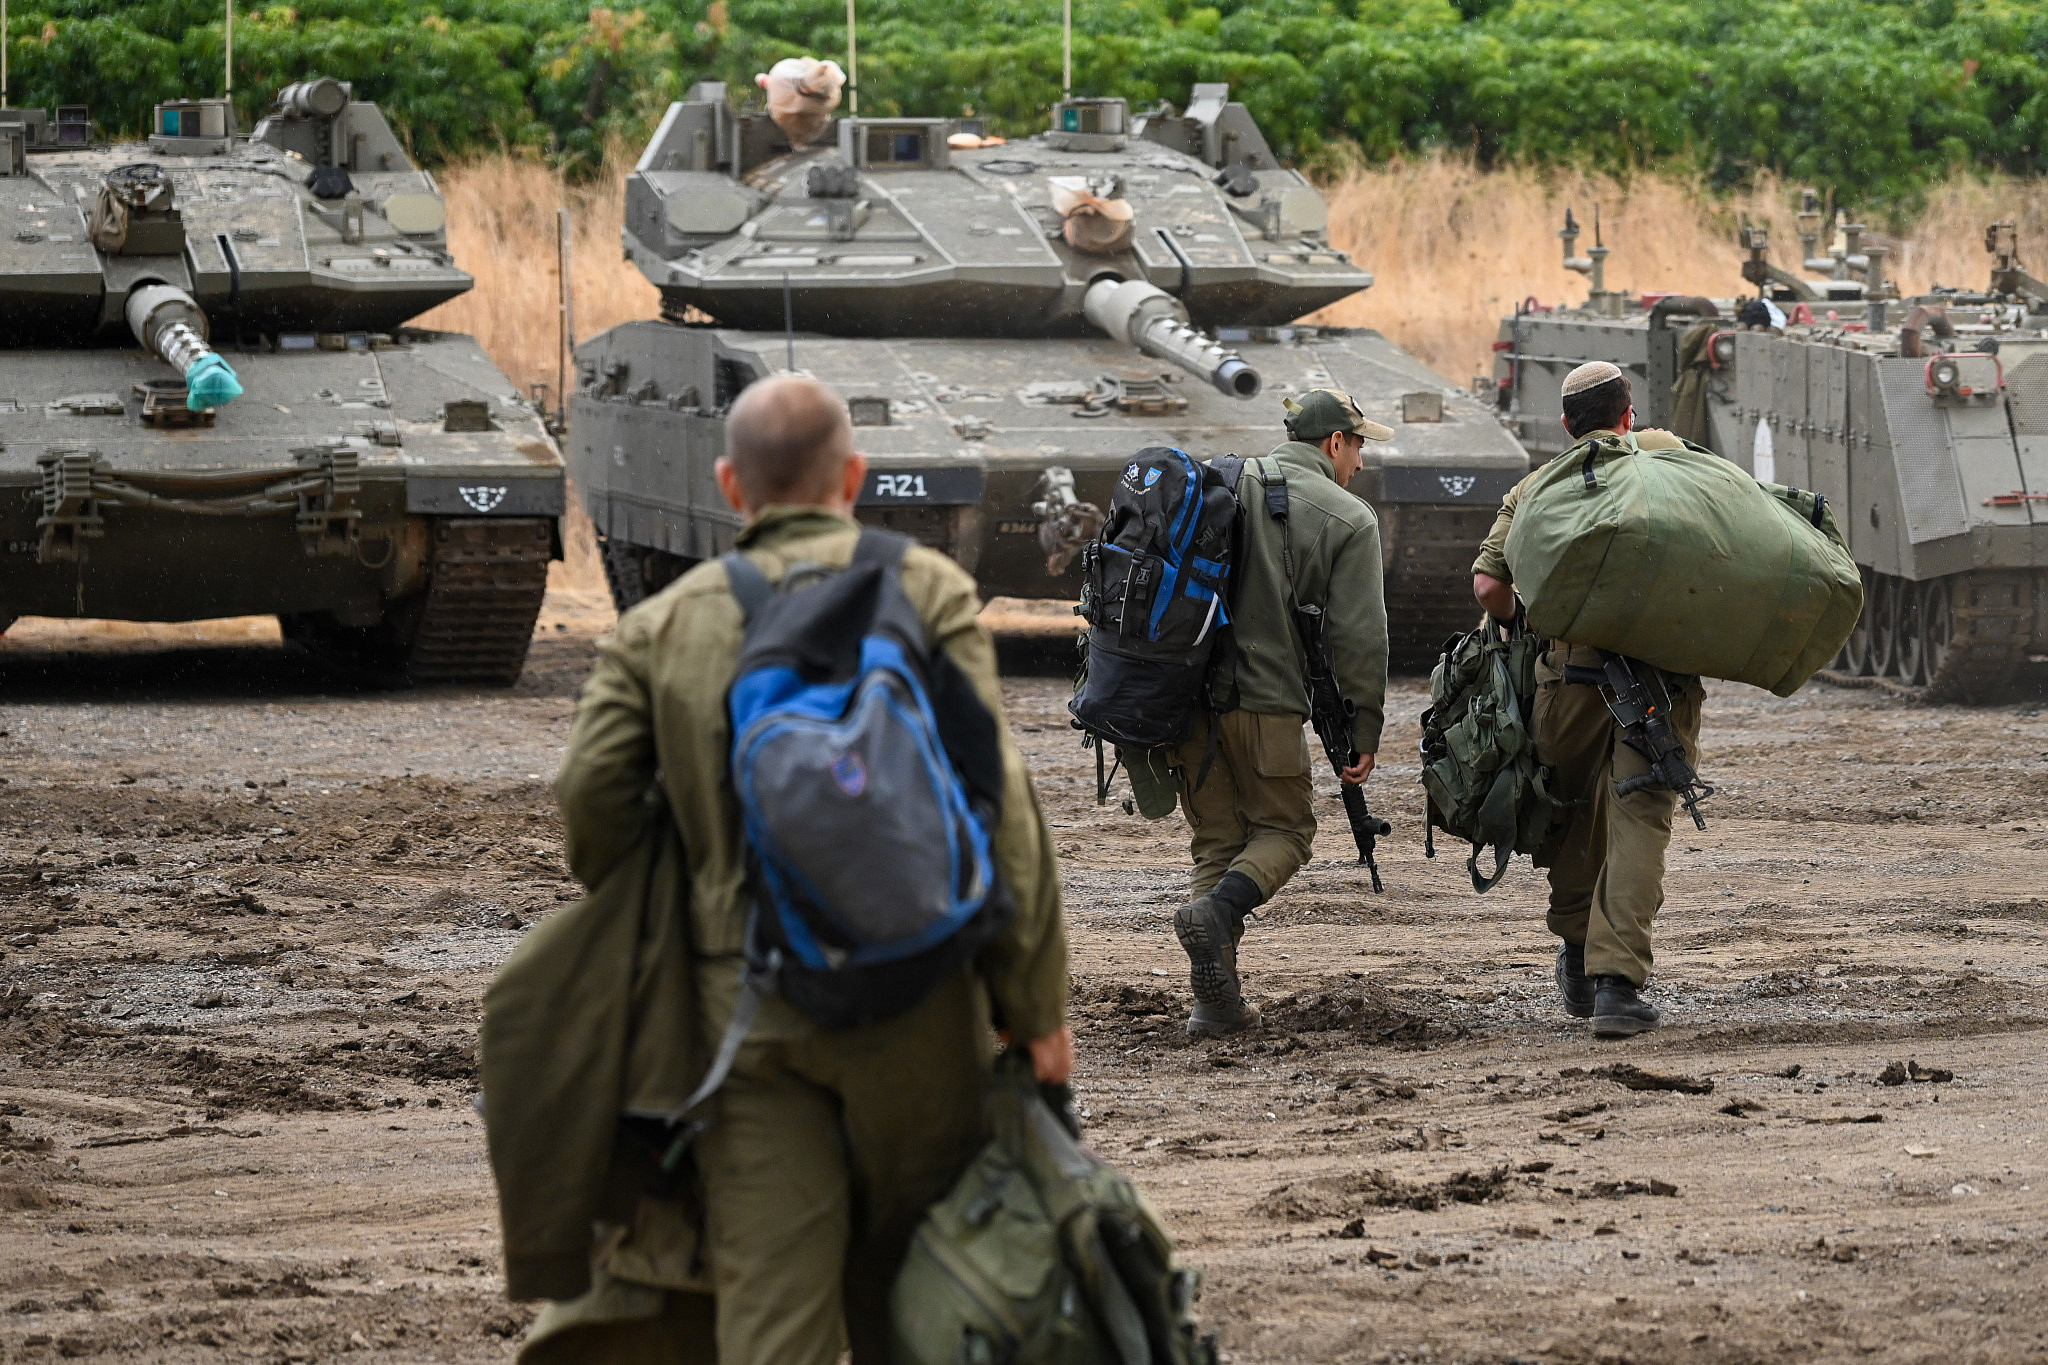 IDF Armored and Engineering corps soldiers are seen getting ready for a large-scale military exercise near the Sea of Galilee, southern Golan Heights, November 9, 2022. (Michael Giladi/Flash90)